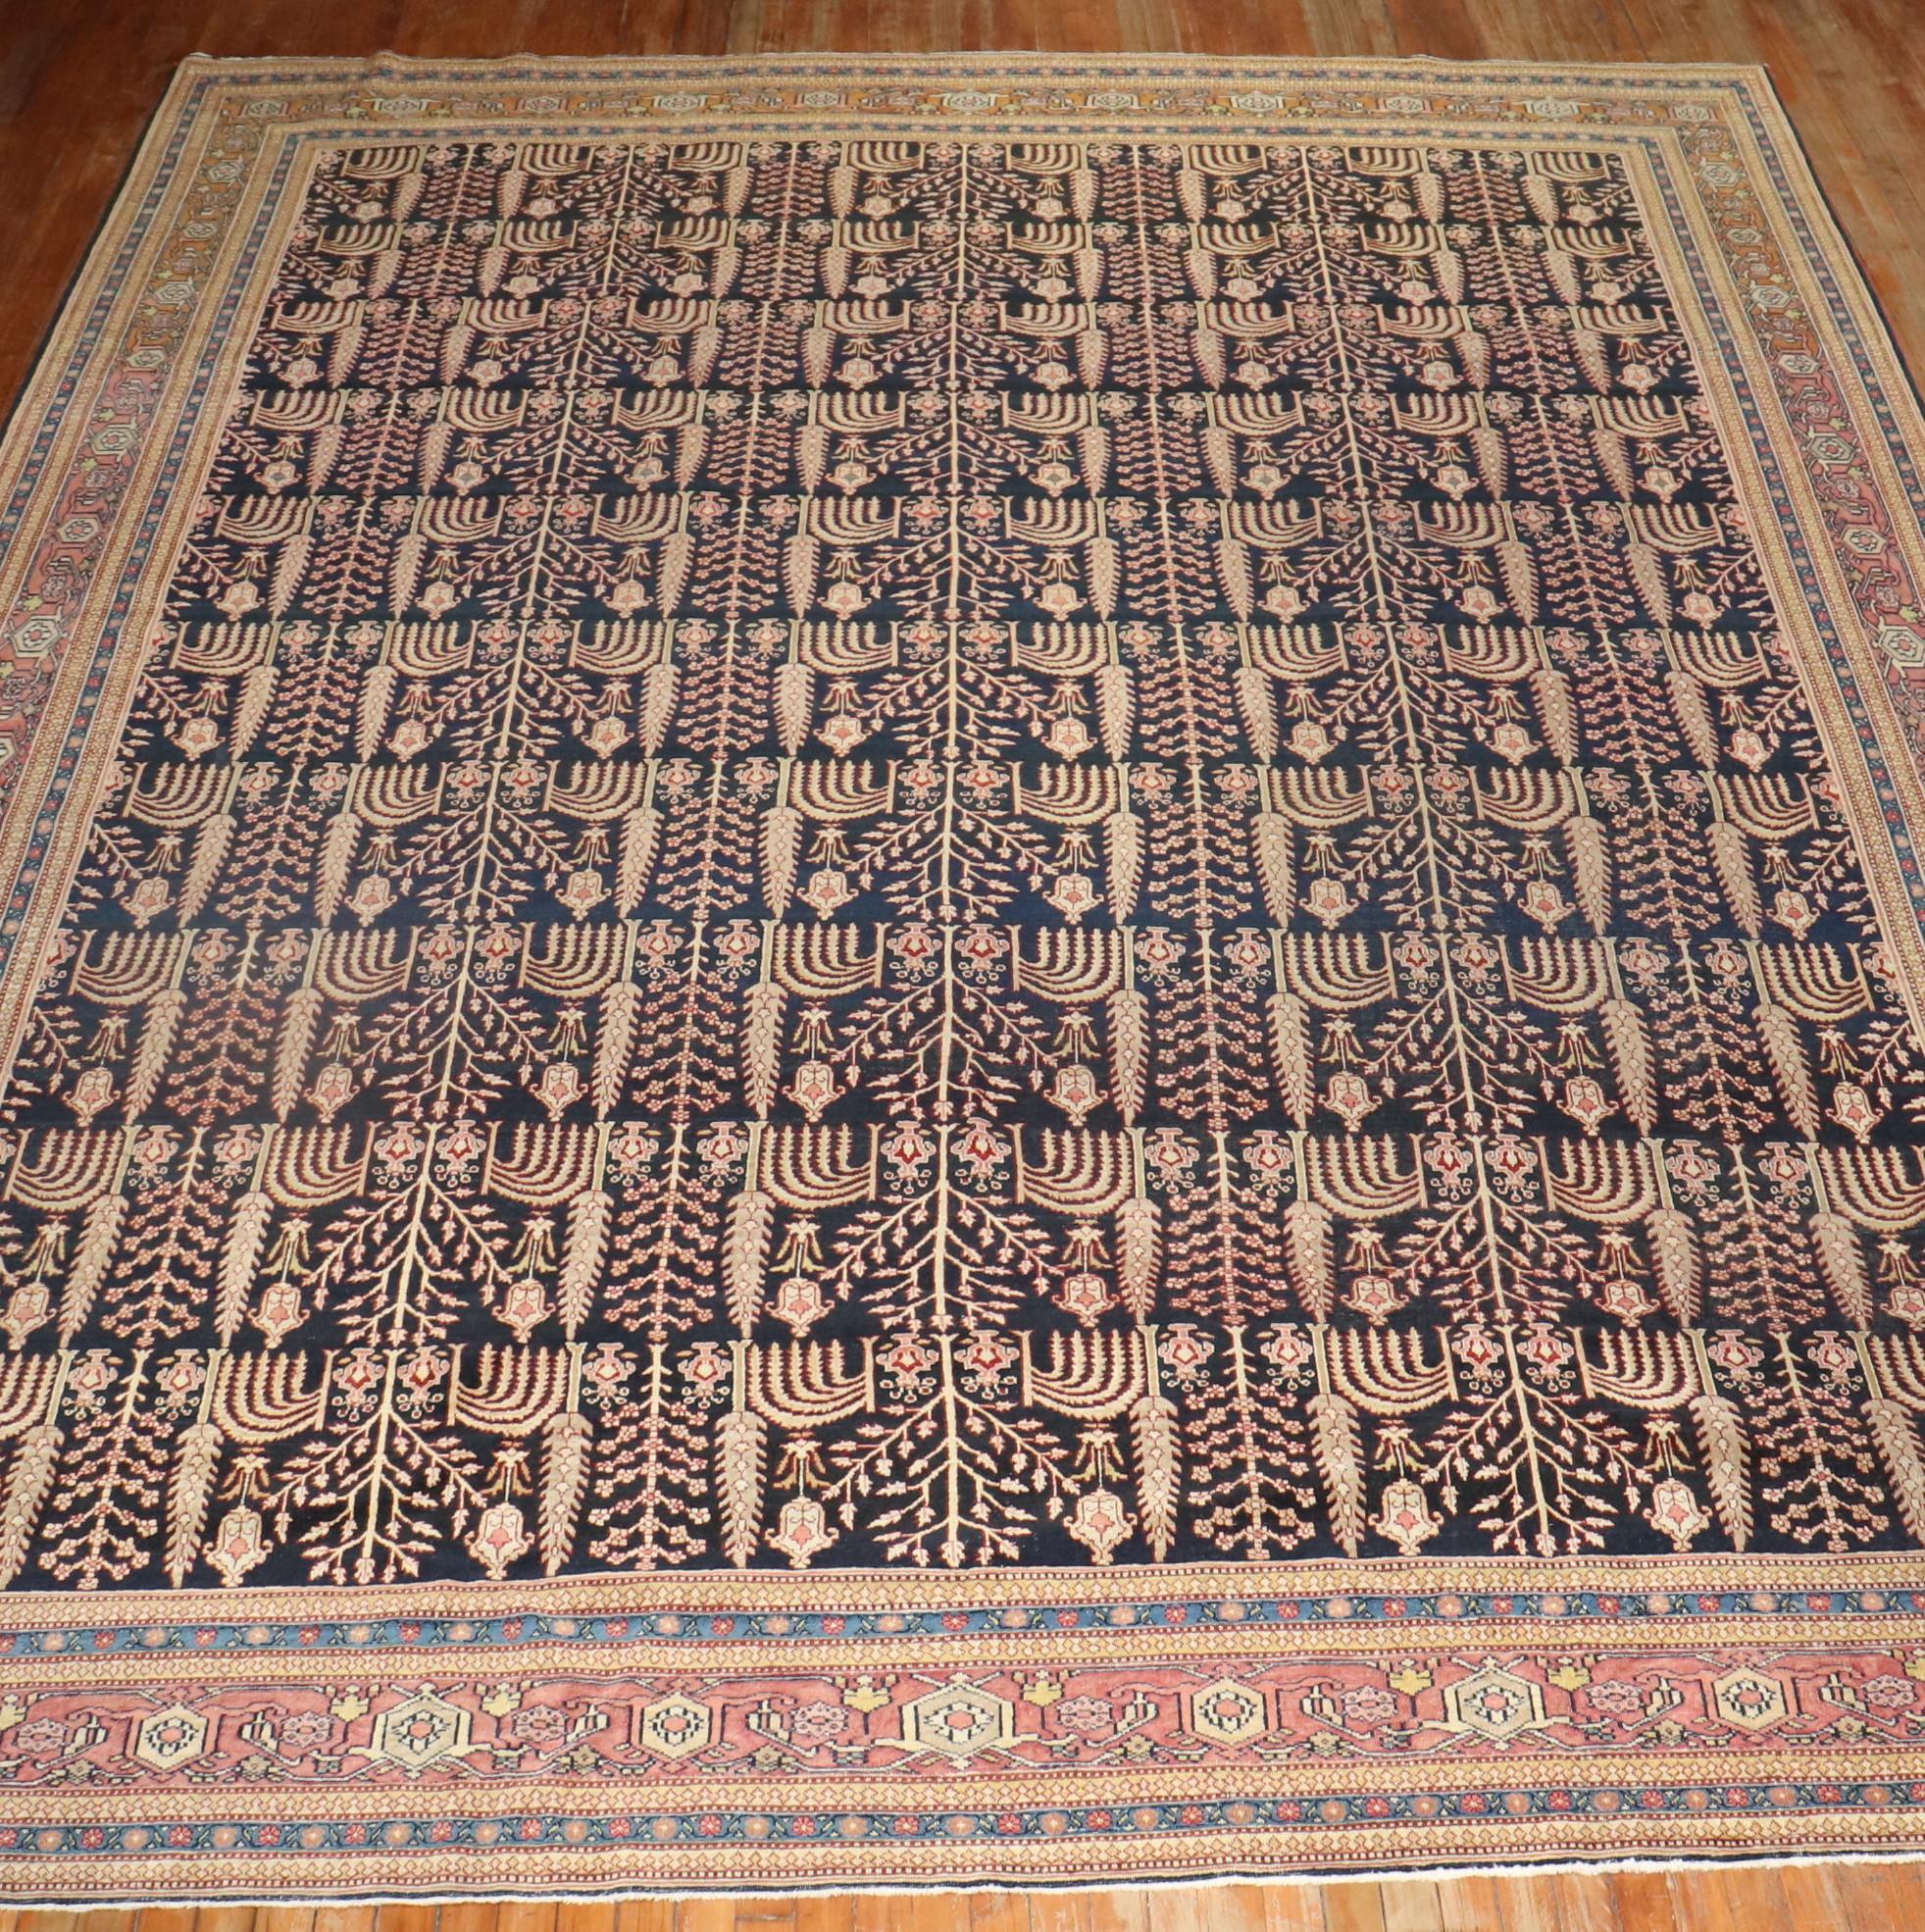 1920s Persian Tabriz Rug with a weeping willow tree design on a slightly worn dark  field

Details
rug no.	j3181
size	10' 1